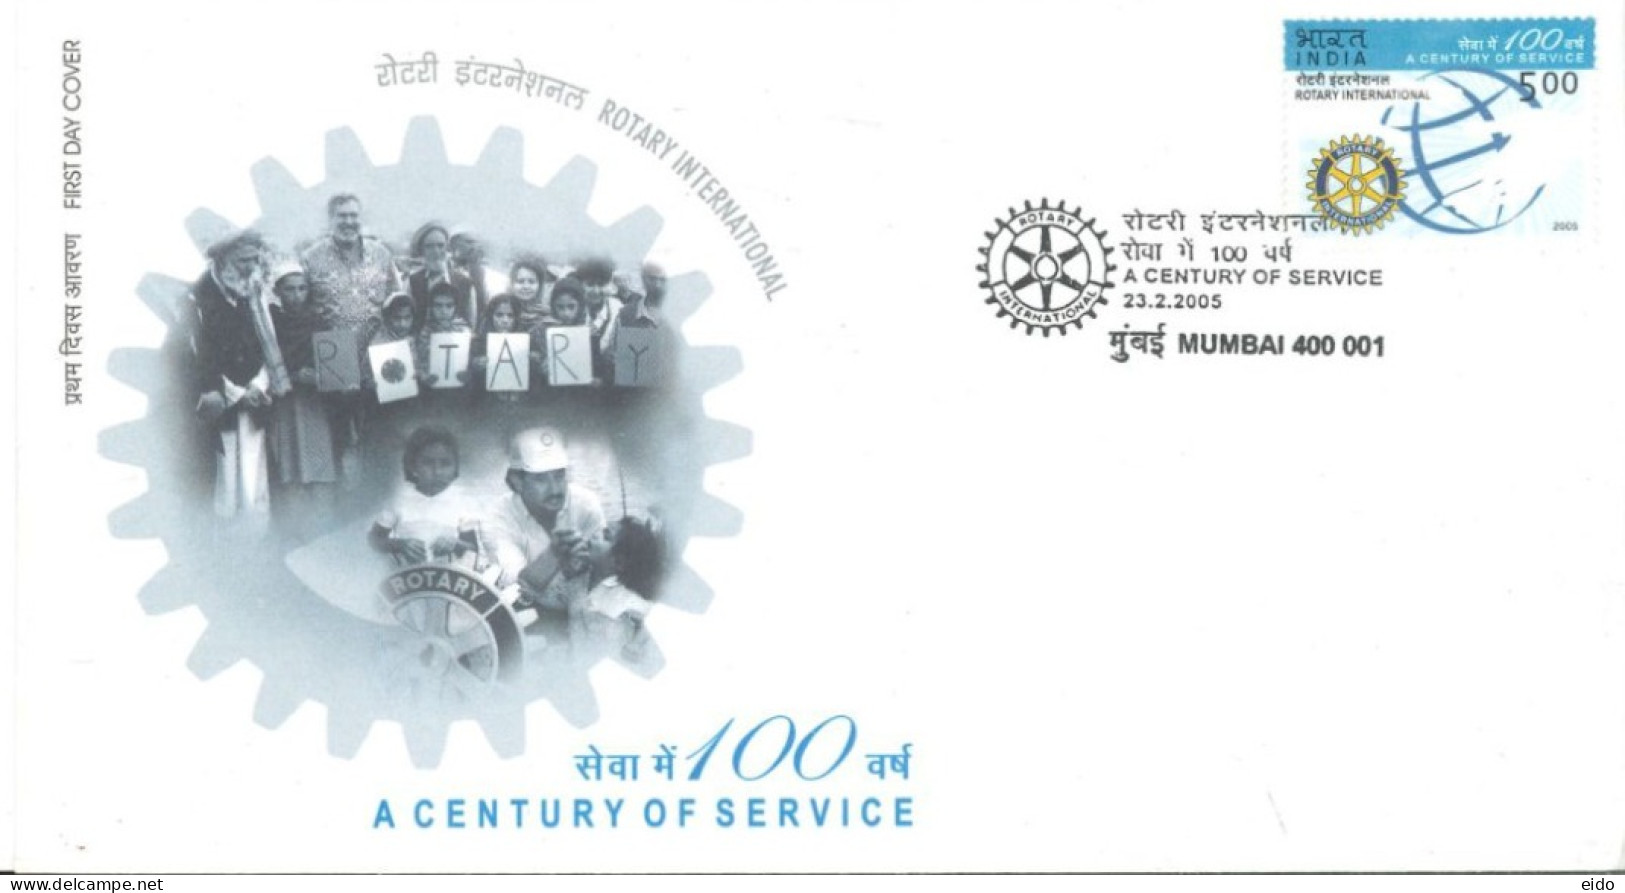 INDIA - 2005 - FDC STAMP OF 100th ANNIVERSARY OF A CENTURY OF SERVICE. - Covers & Documents